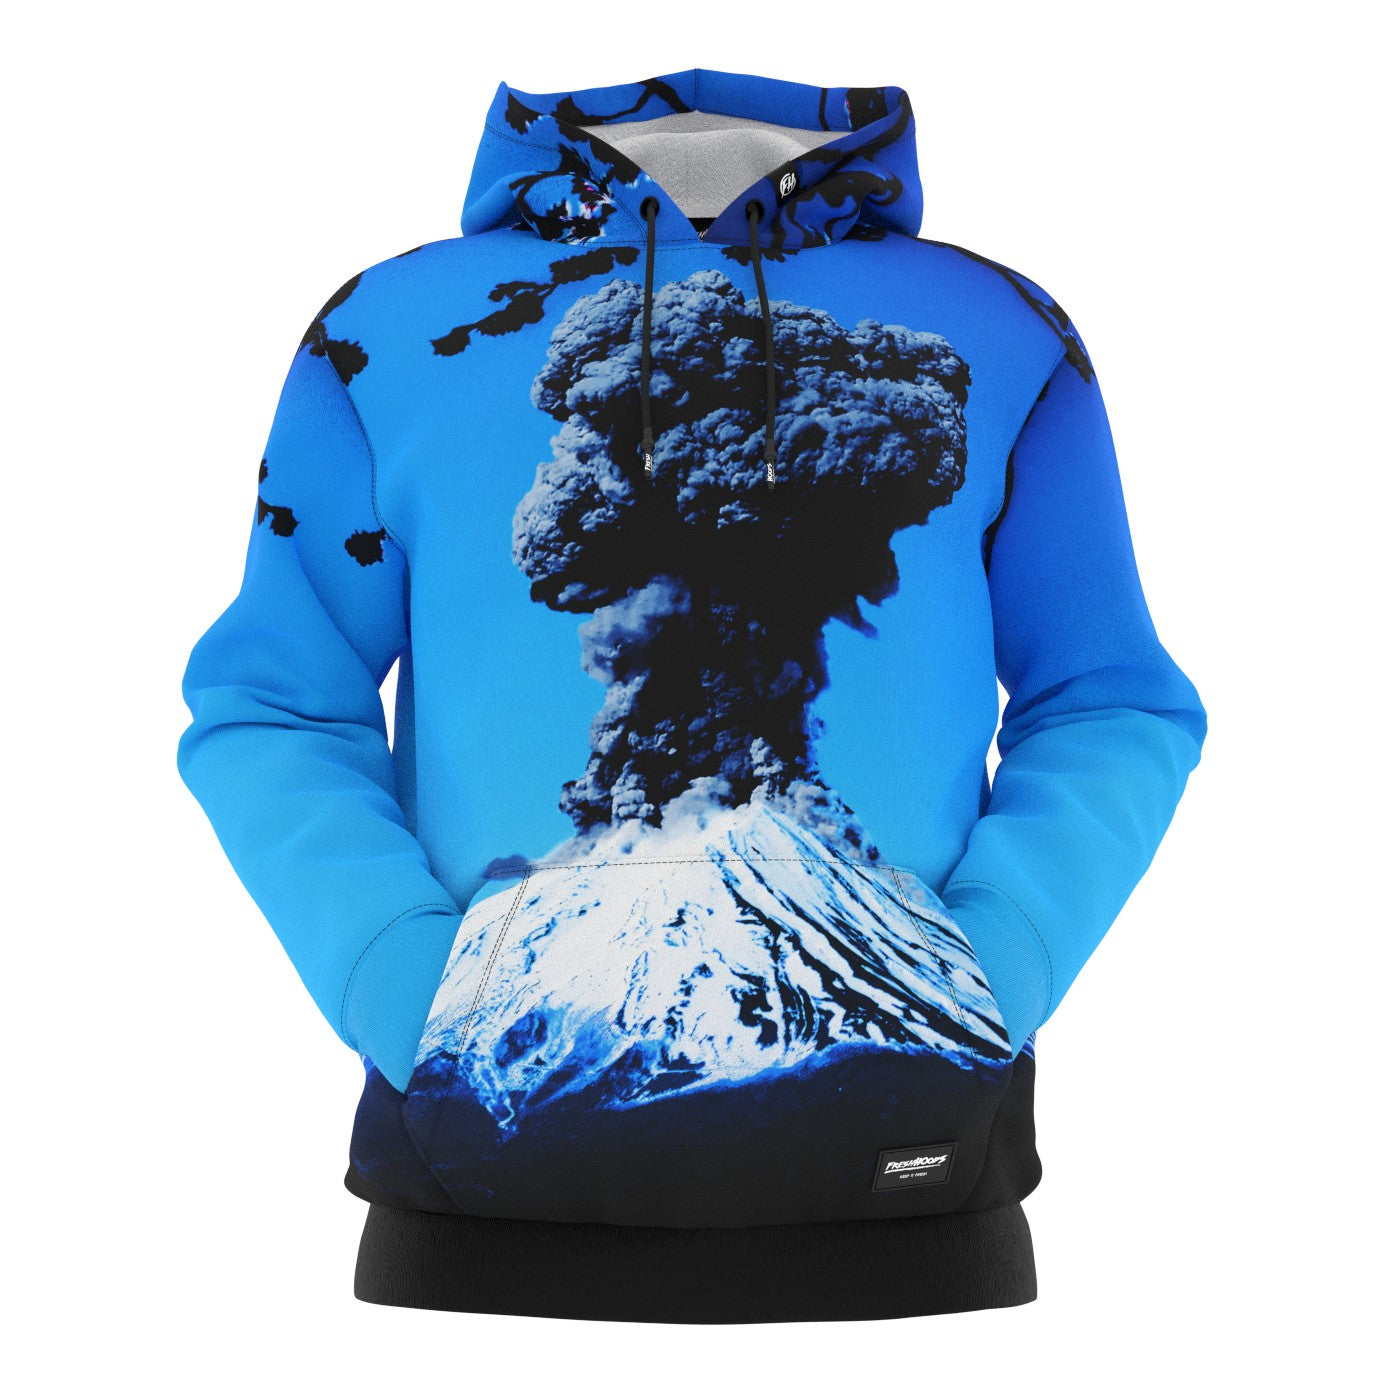 Chaotic Scenery Hoodie